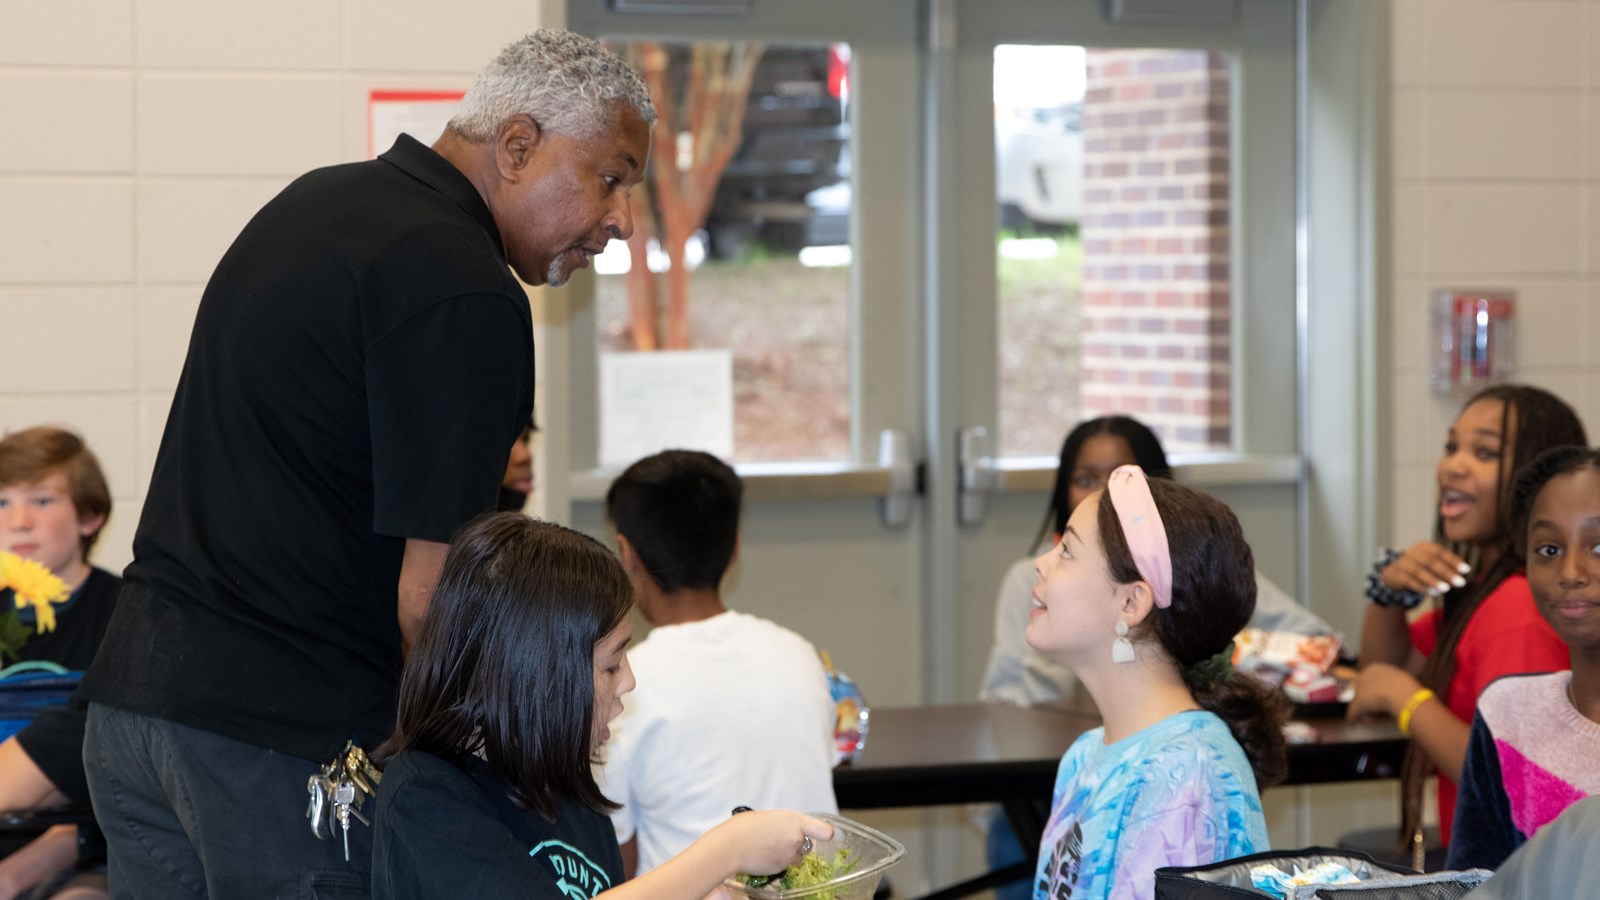 Pine Mountain Middle School custodian Mark Johnson chats with students at lunch.